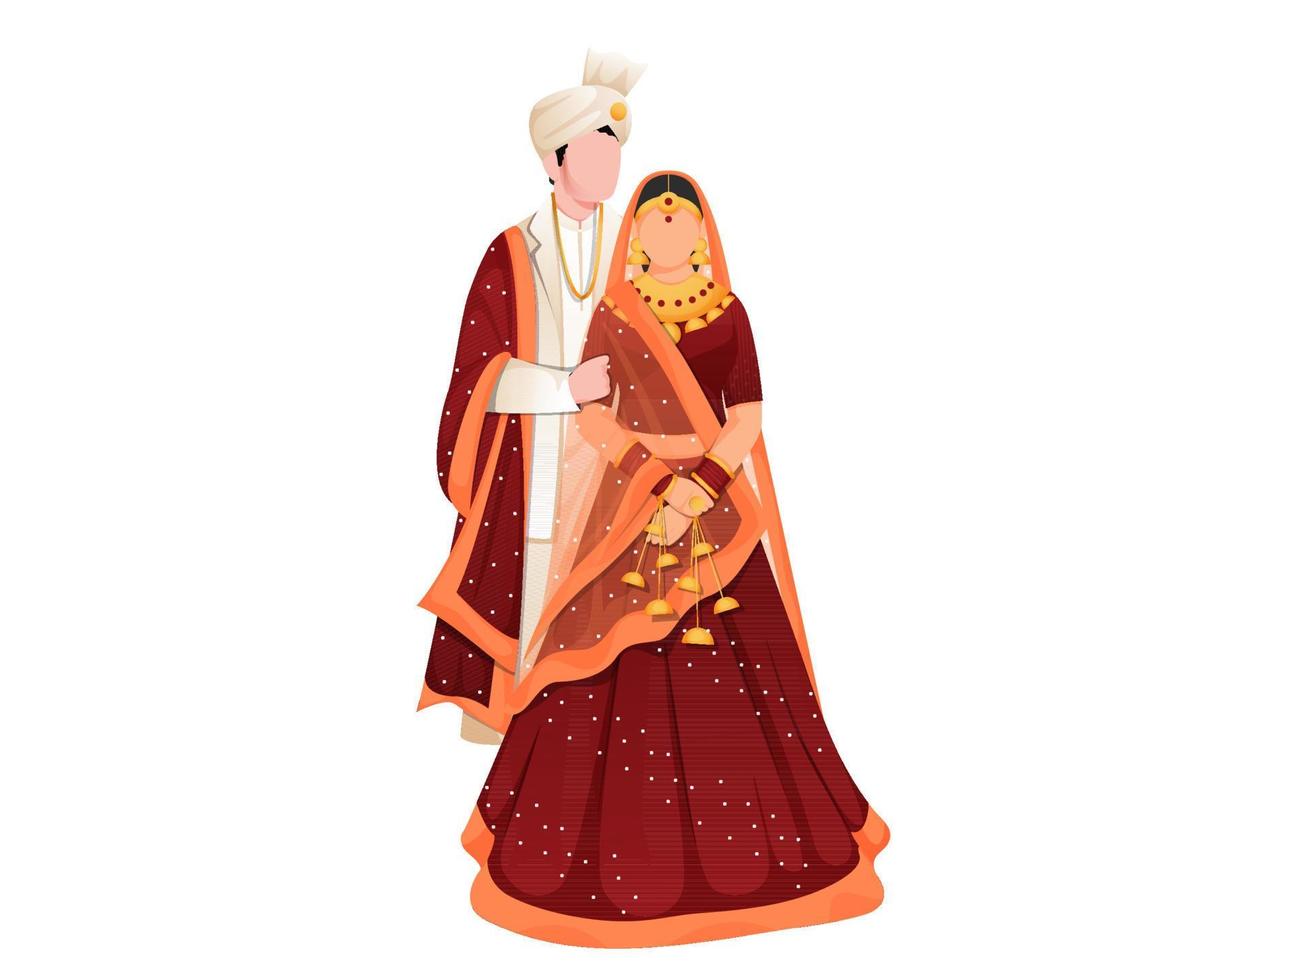 Faceless Indian Wedding Couple Together Standing on White Background. vector